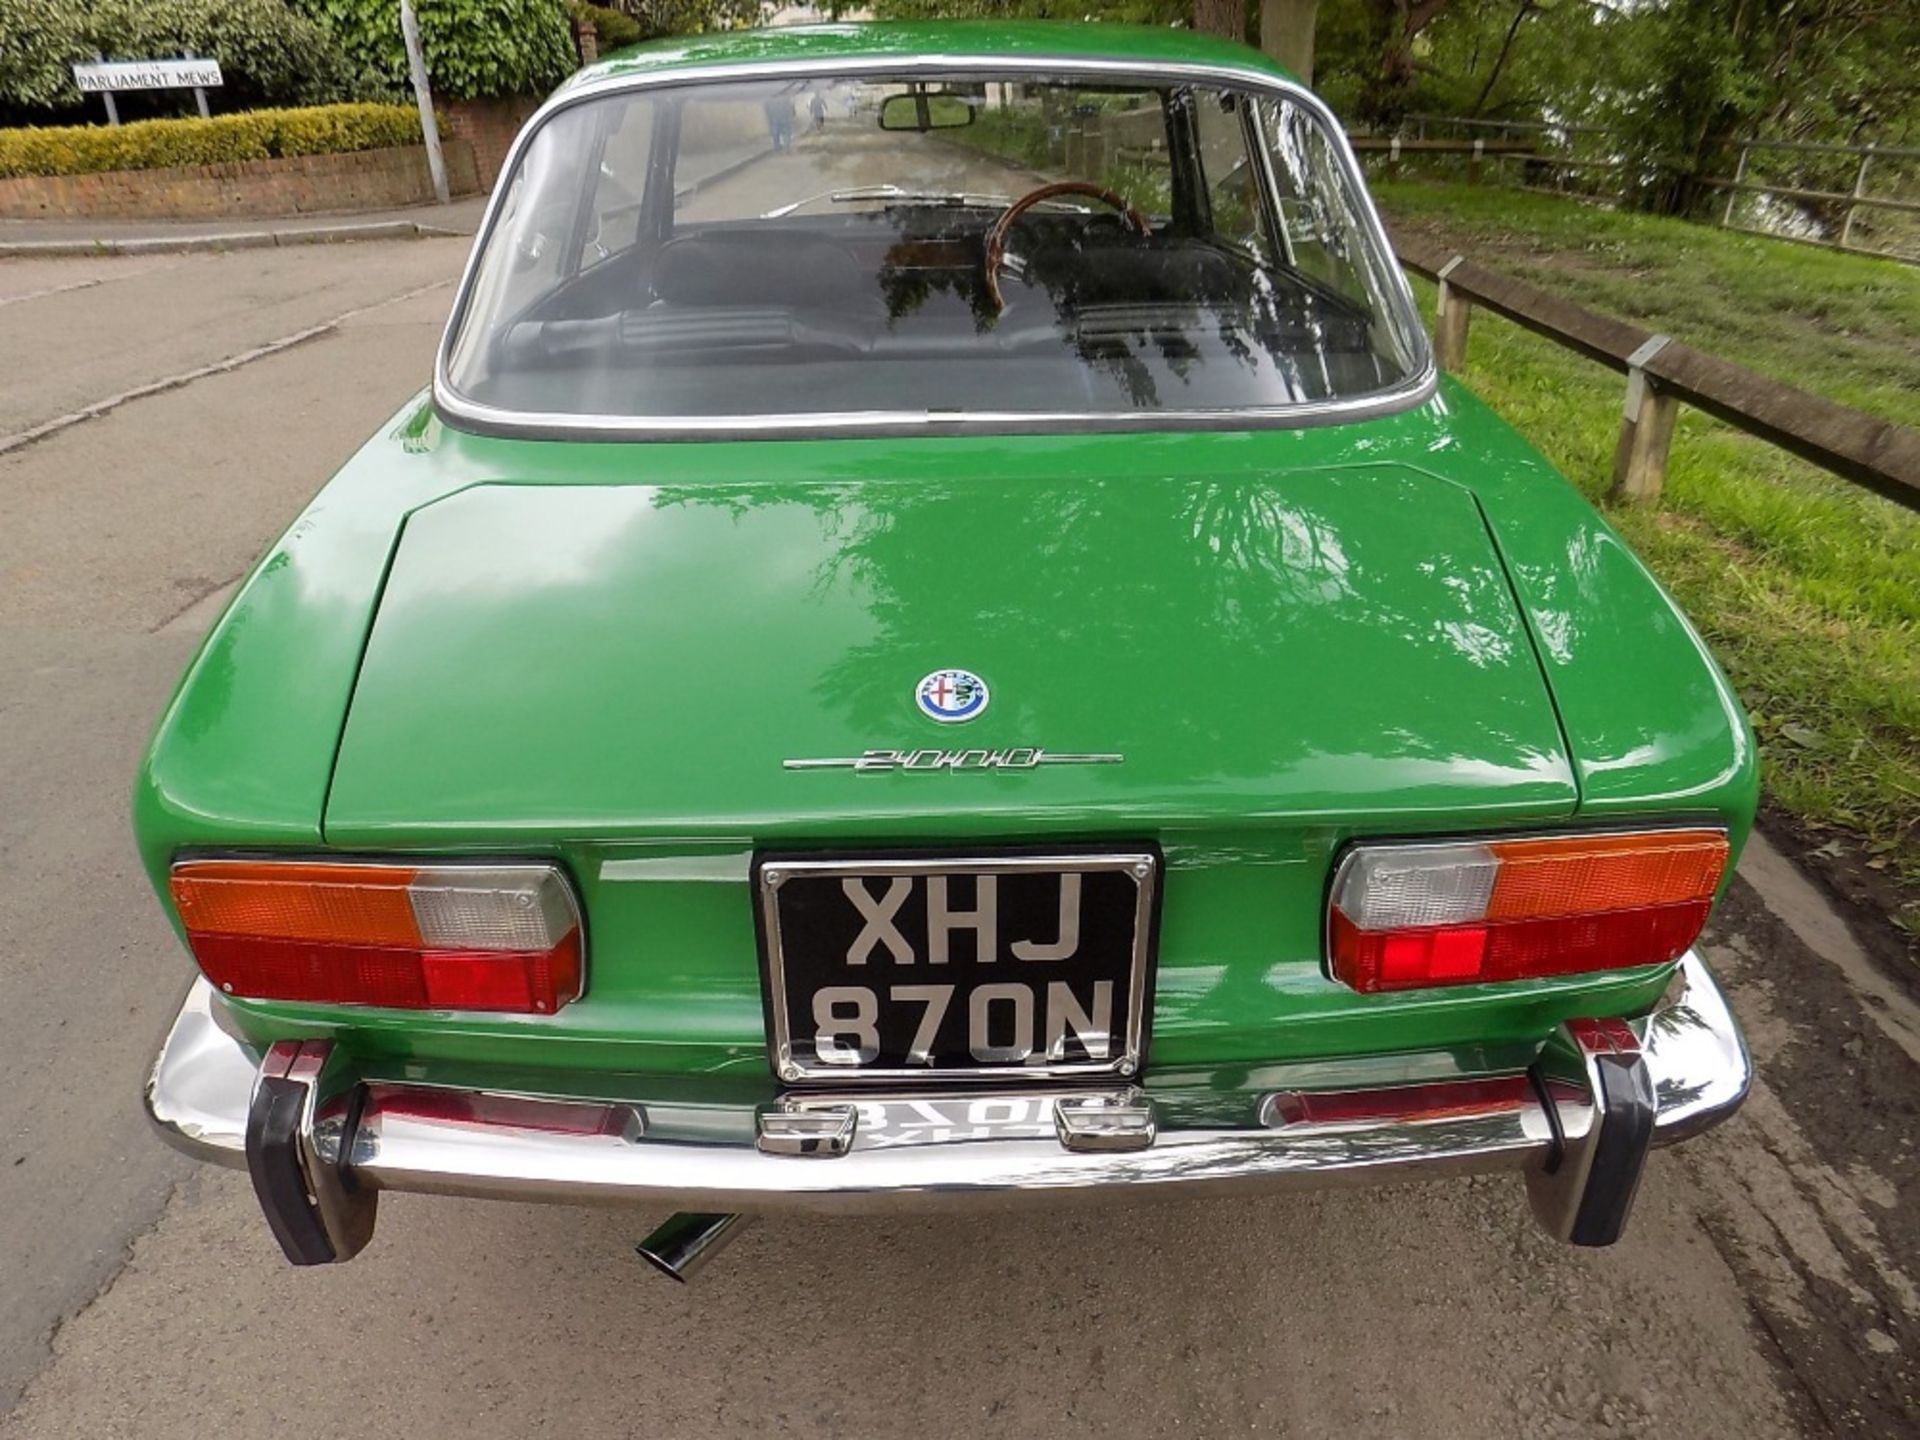 1975 ALFA-ROMEO 2000 GTV Registration Number: XHJ870N Chassis Number: AR.2417350 Recorded Mileage: - Image 4 of 40